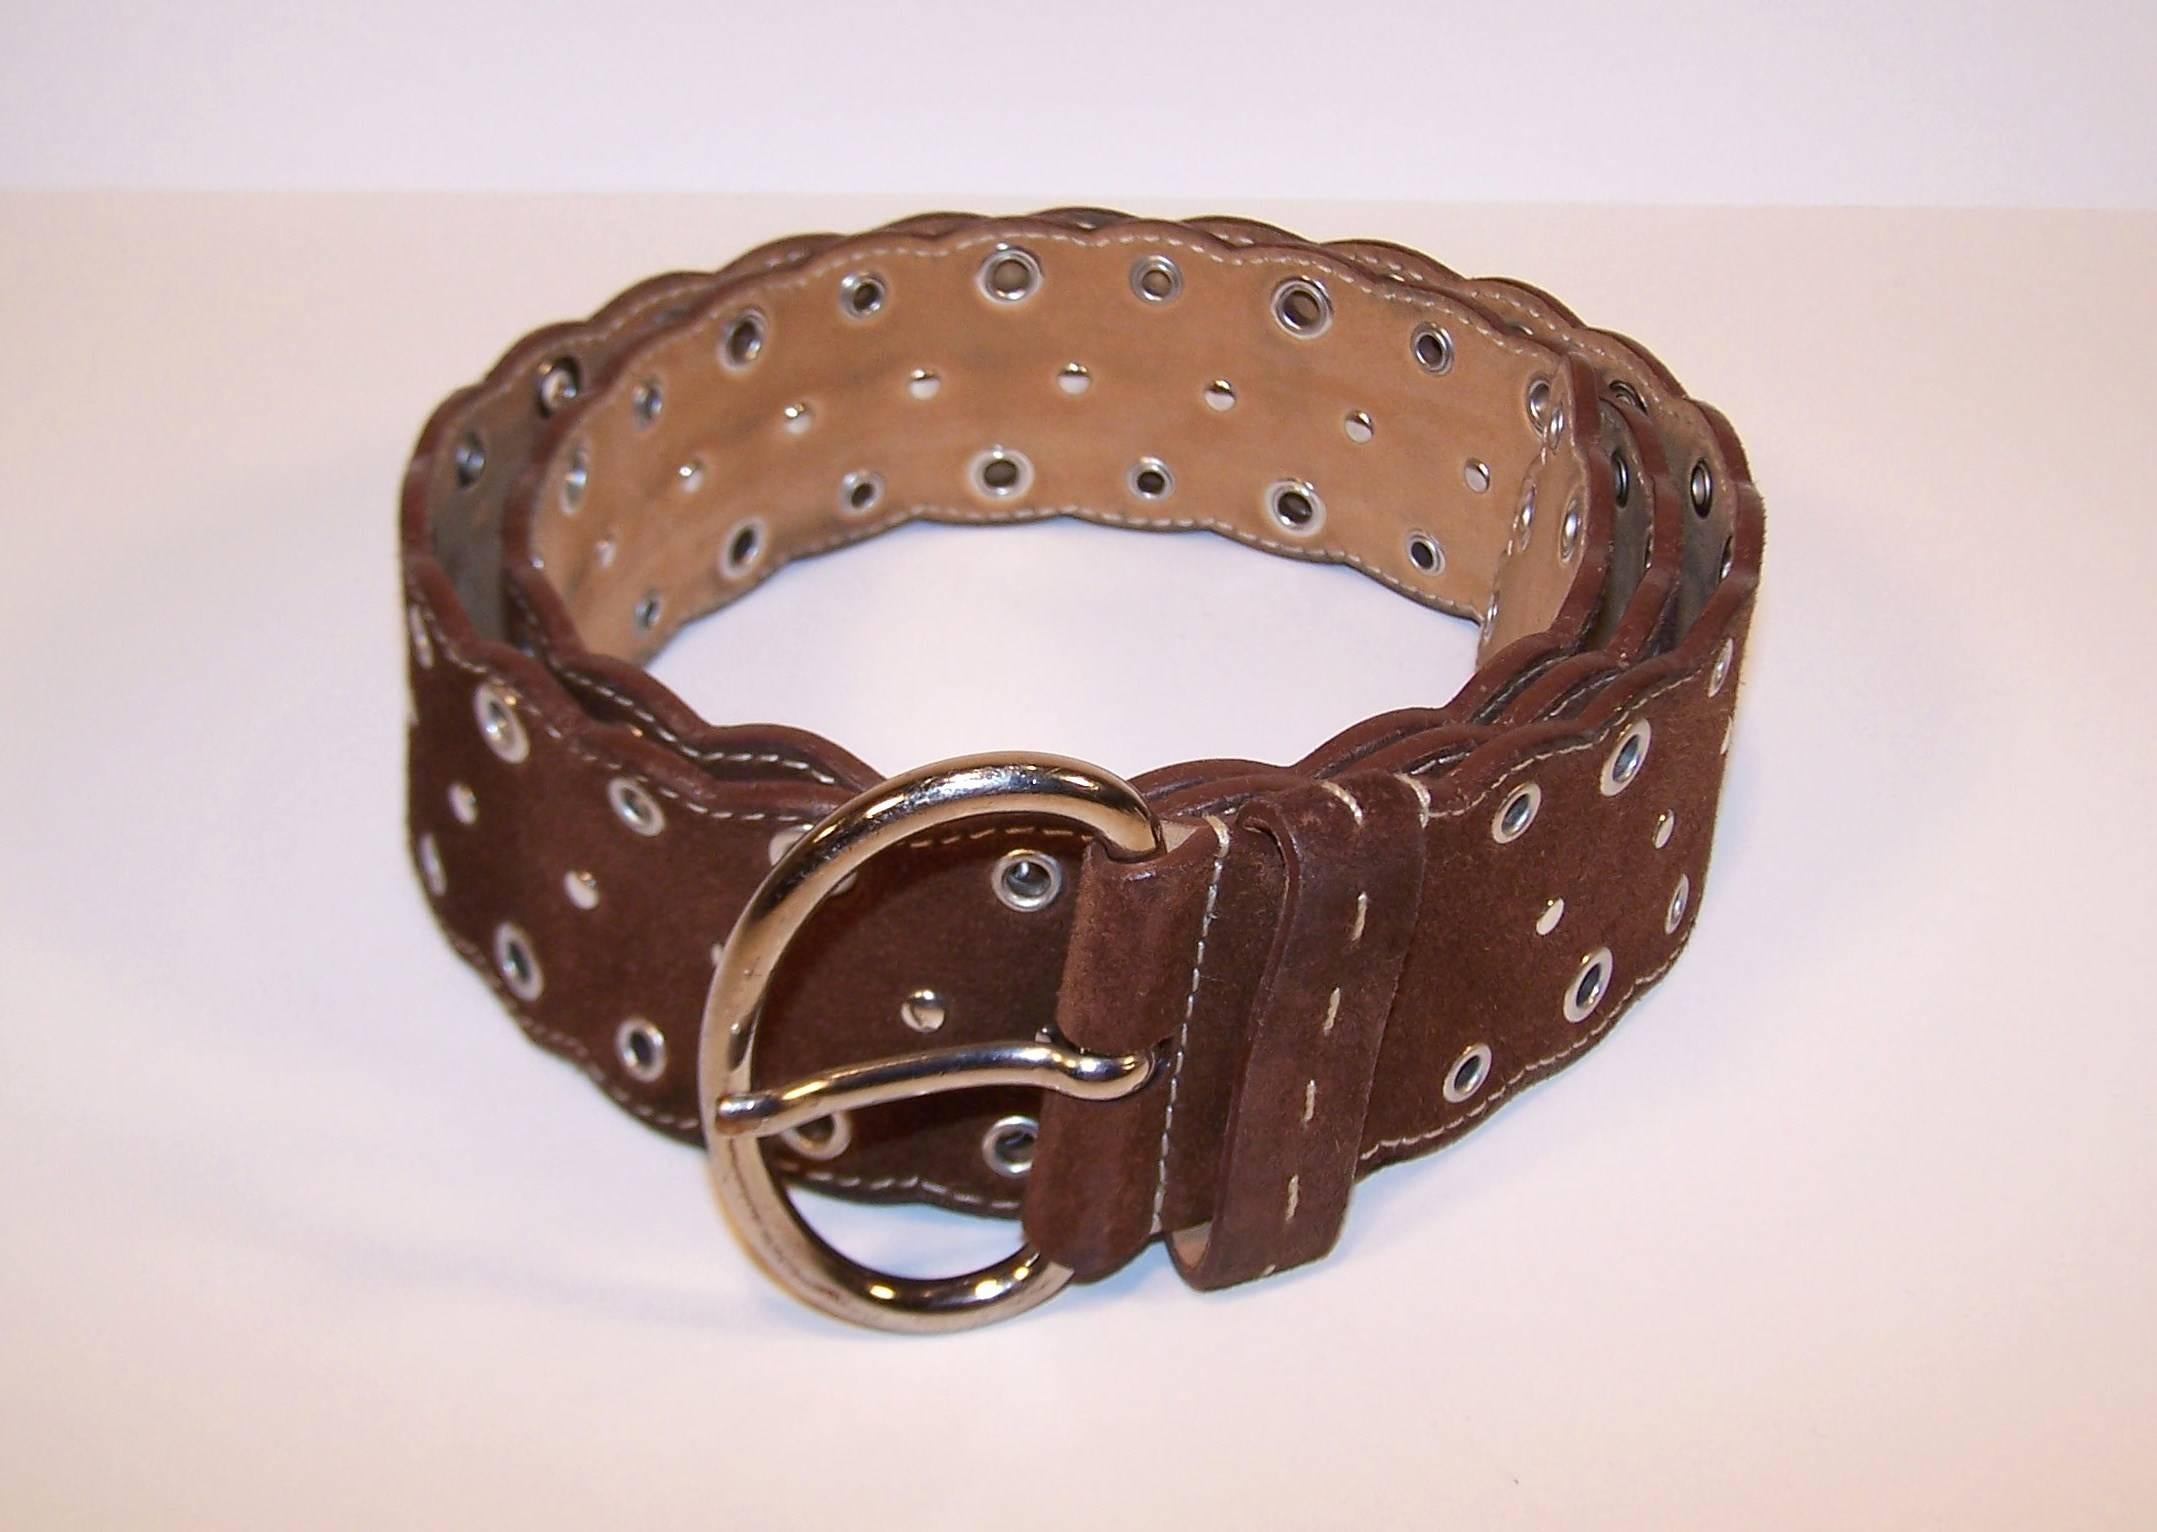 Prada has stepped back to the 1960's with this bohemian inspired chocolate brown suede belt.  The belt has a scalloped pattern decorated with silver tone grommets, studs and buckle to complete the look.  Fabulous worn with jeans...hiphuggers, even